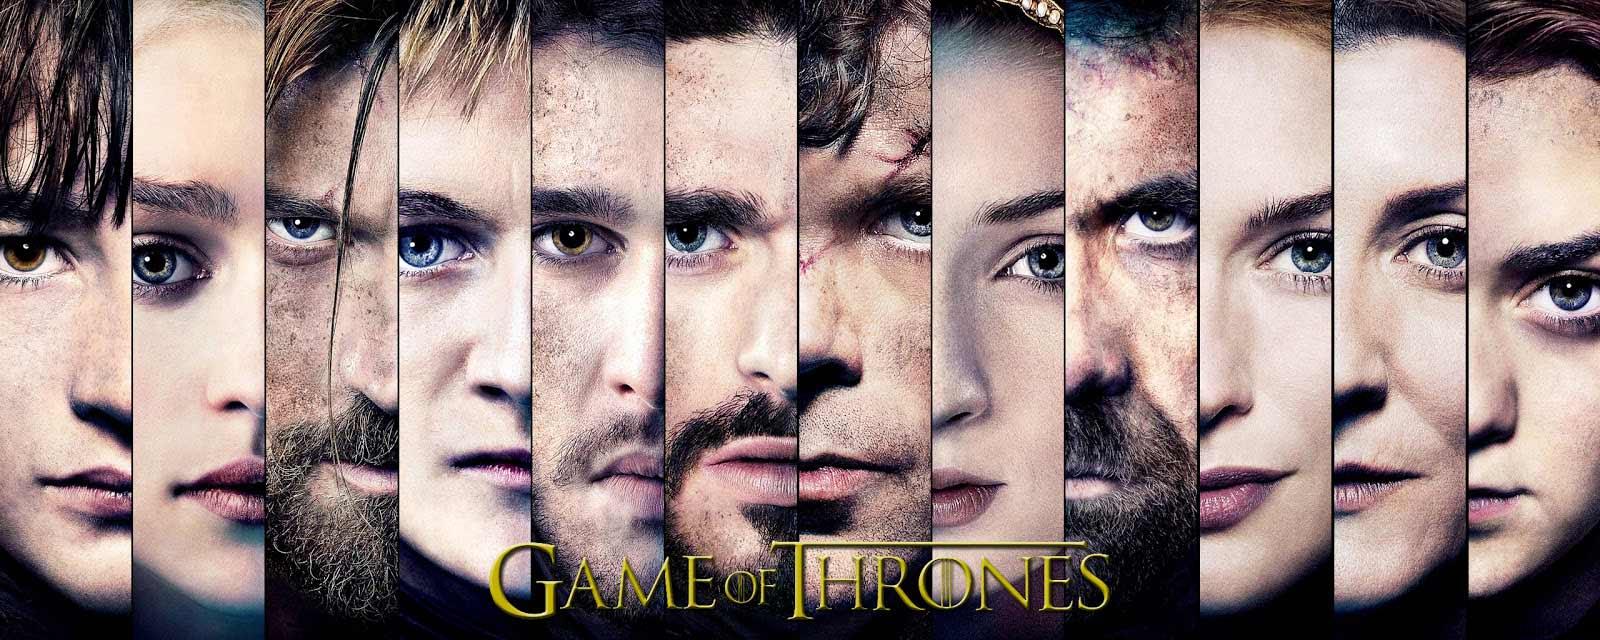 things to expect on game of throne season 5 finale